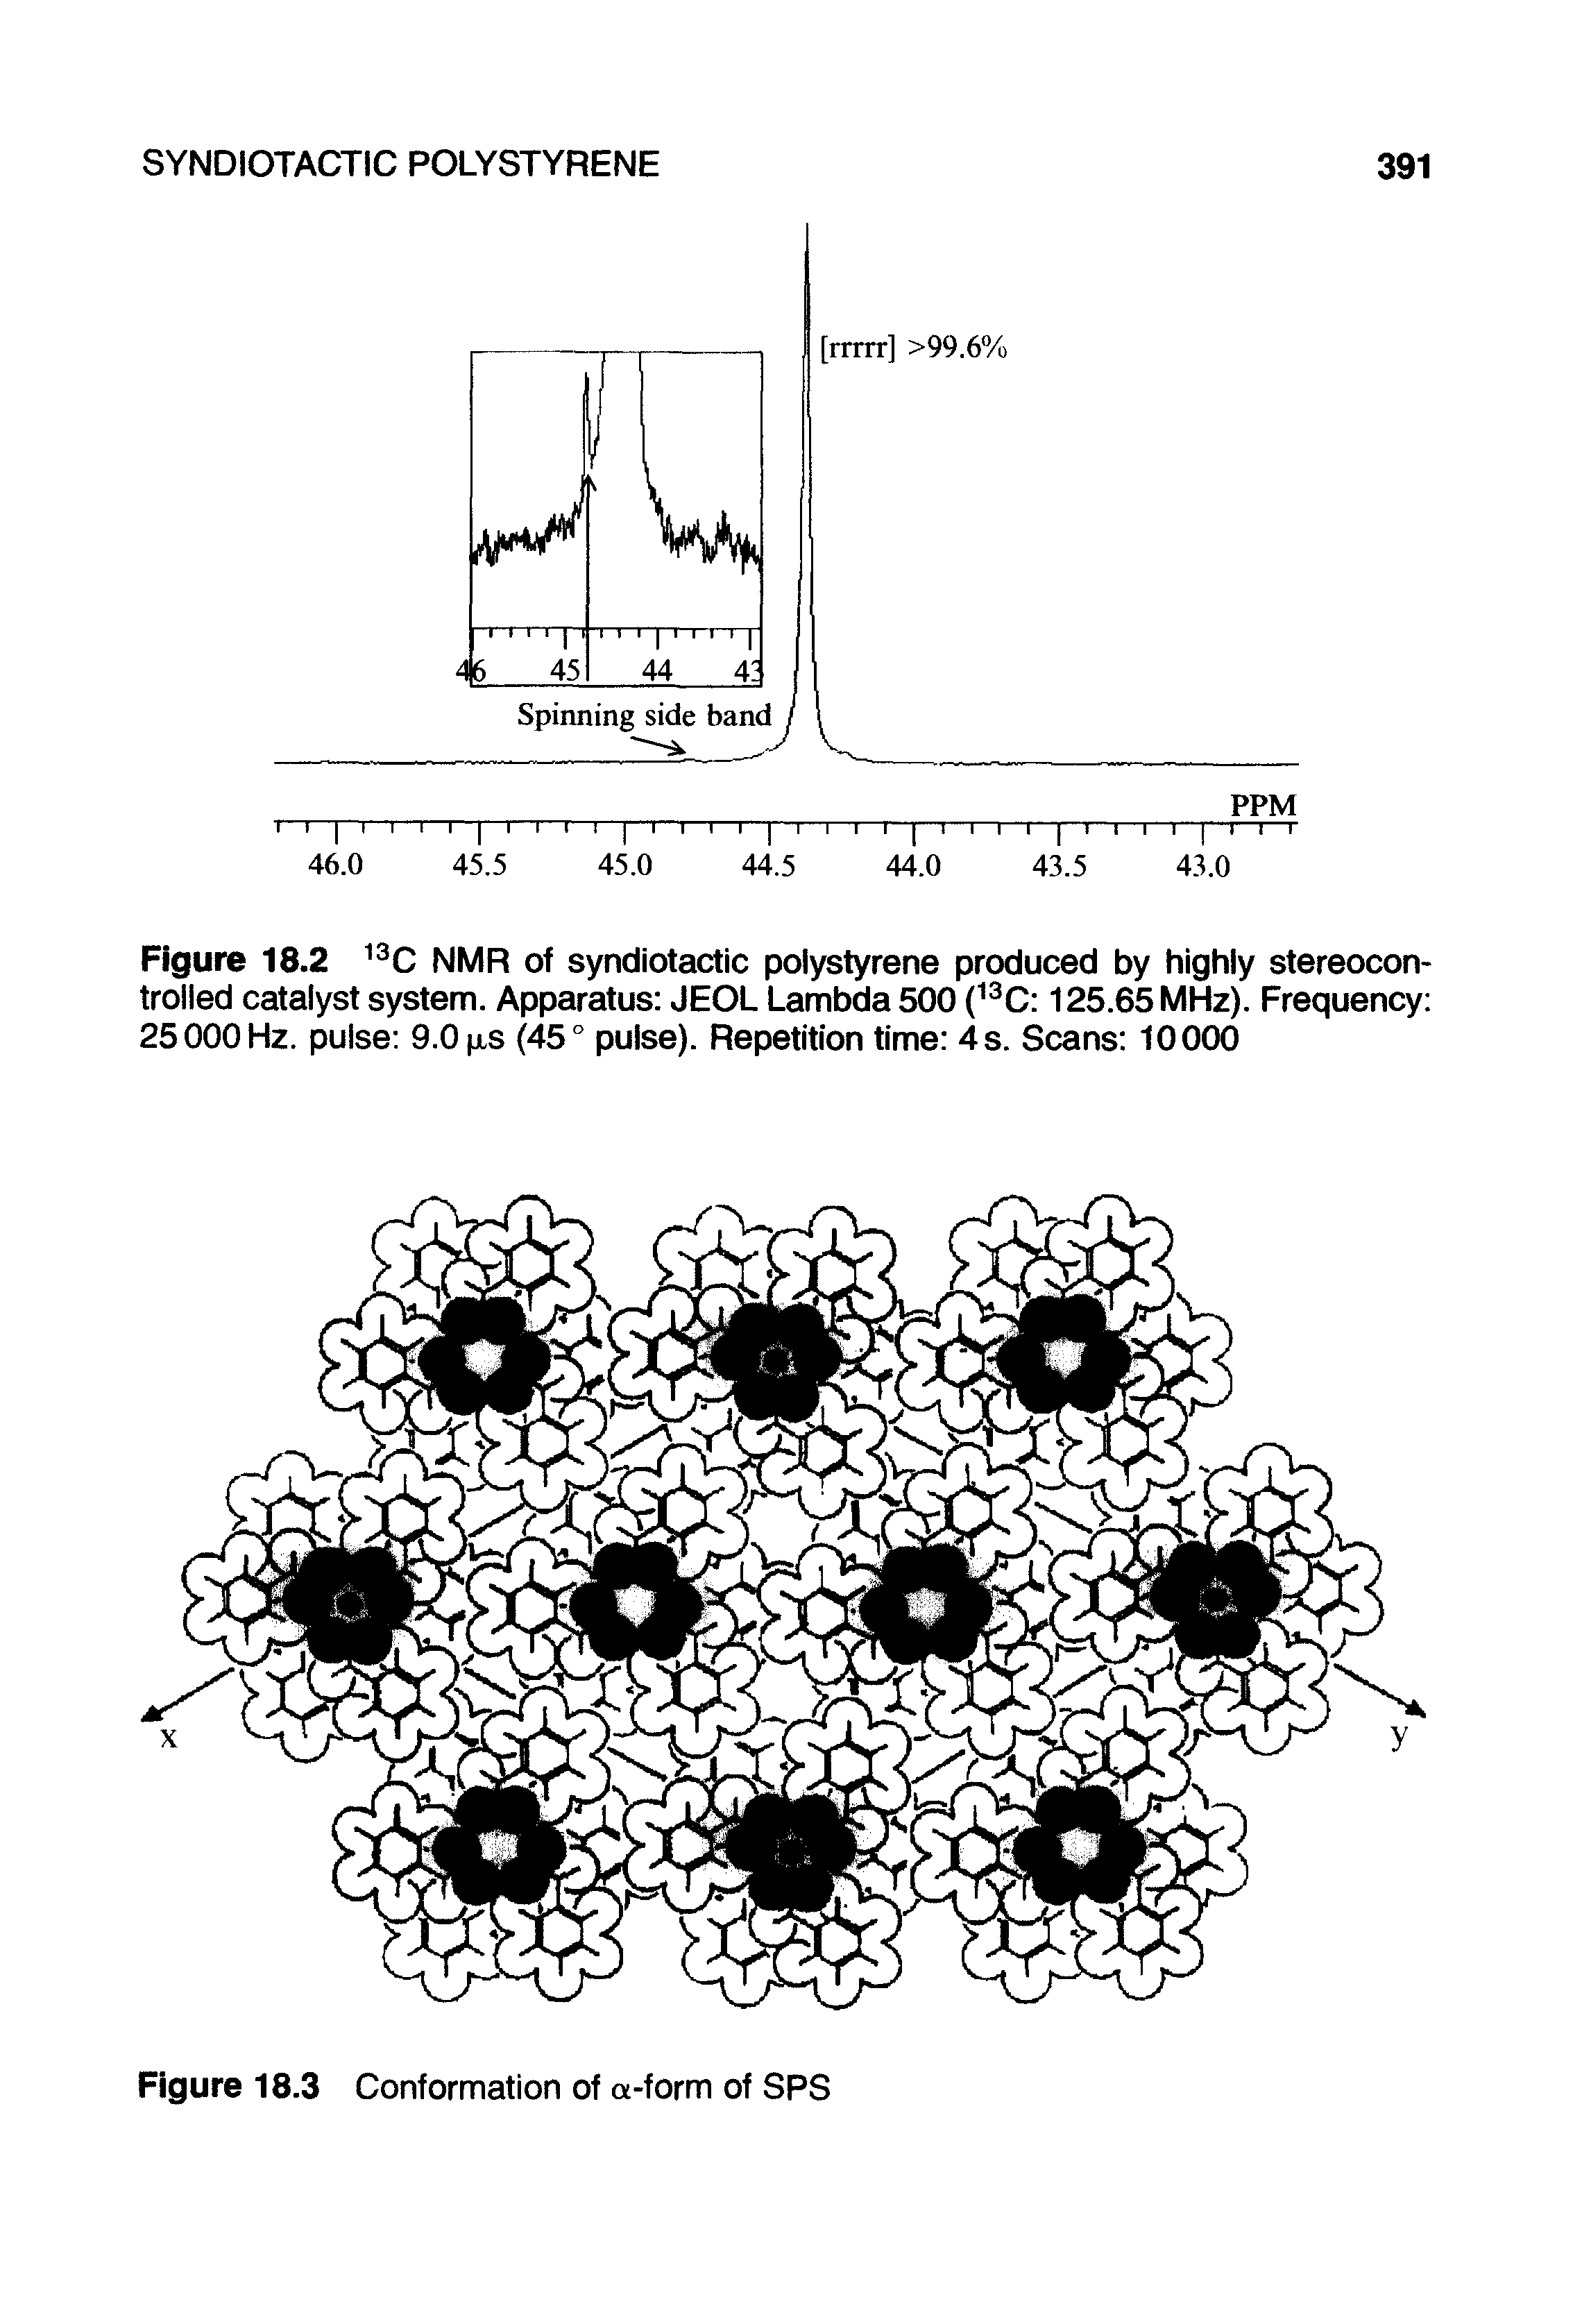 Figure 18.2 13C NMR of syndiotactic polystyrene produced by highly stereocon-trolled catalyst system. Apparatus JEOL Lambda 500 (13C 125.65 MHz). Frequency 25000 Hz. pulse 9.0 xs (45° pulse). Repetition time 4 s. Scans 10000...